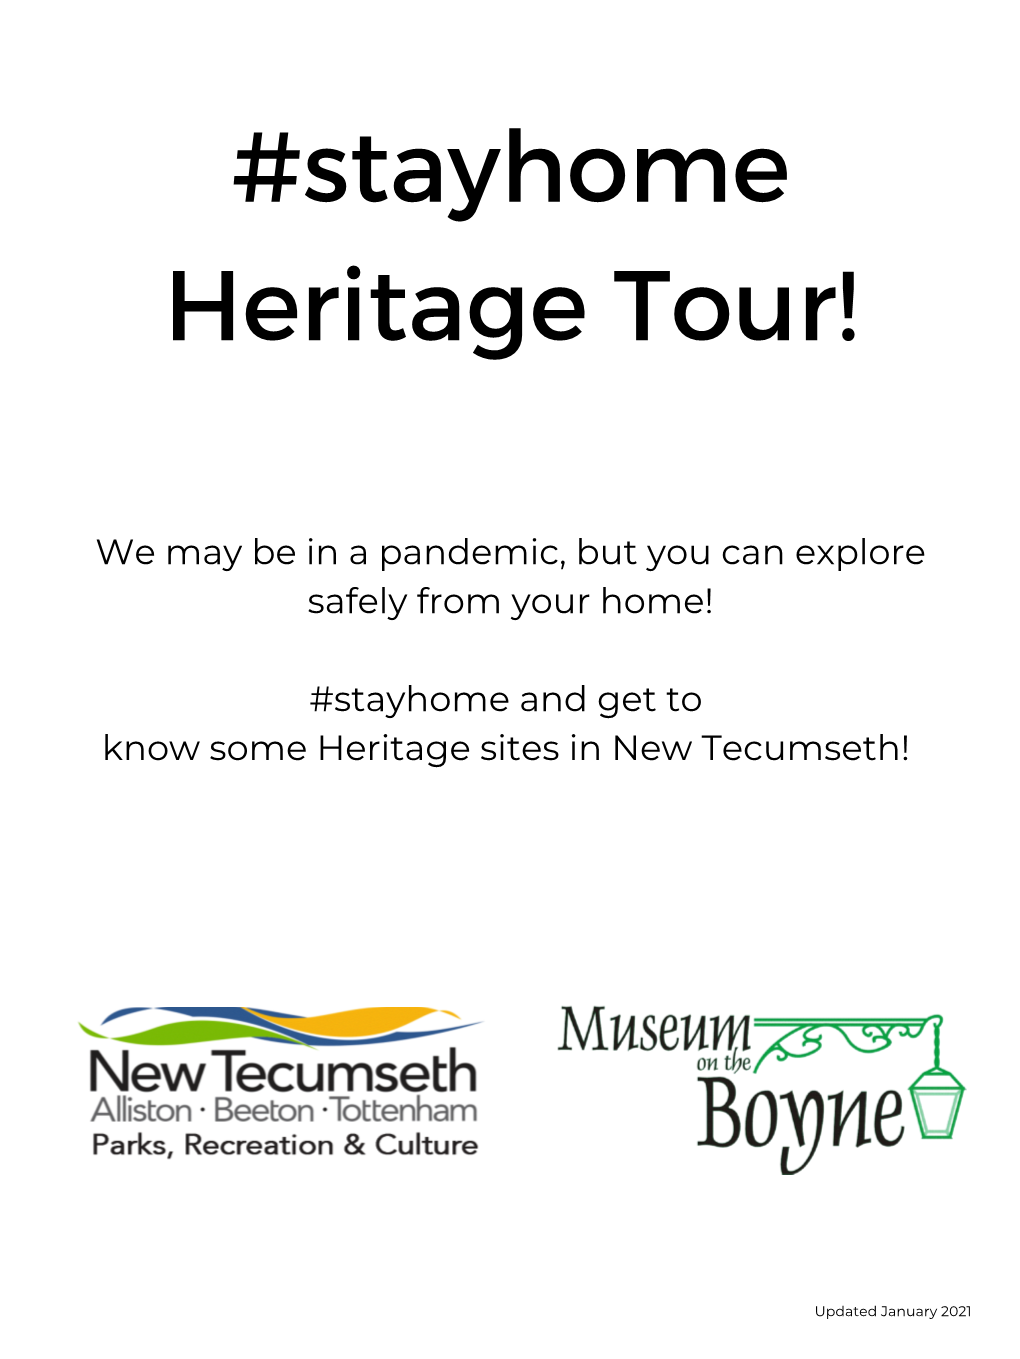 Stayhome Heritage Tour!